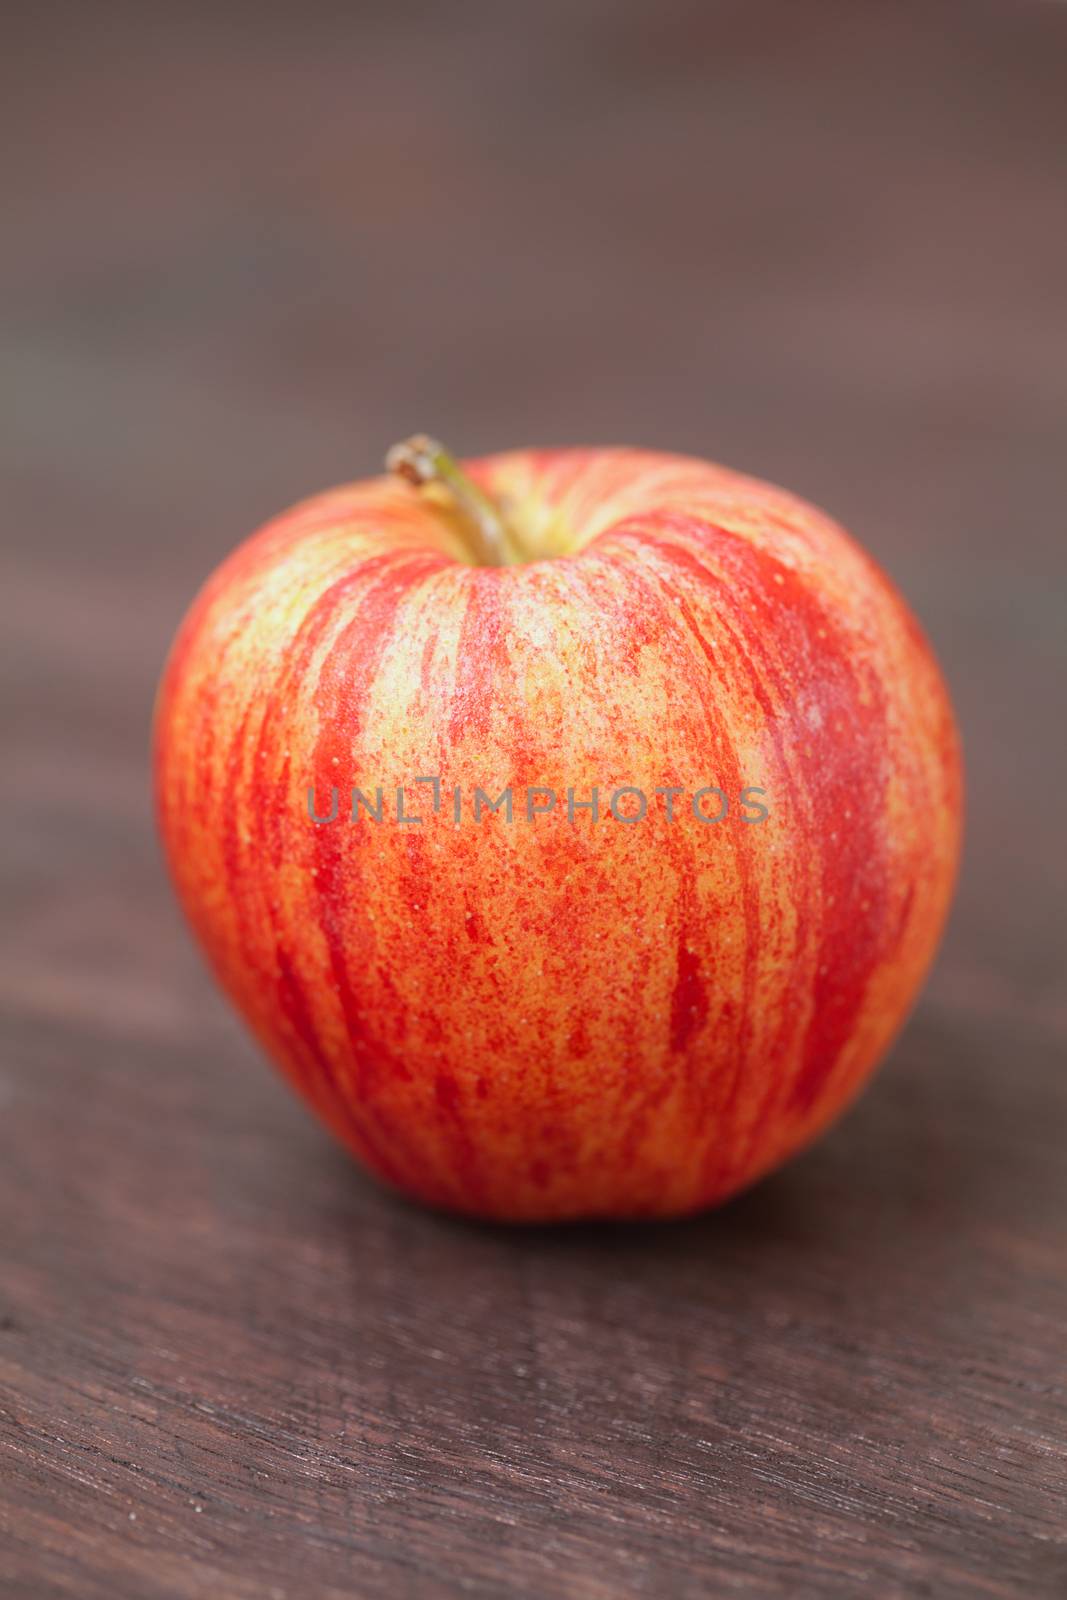  juicy apple on a wooden surface